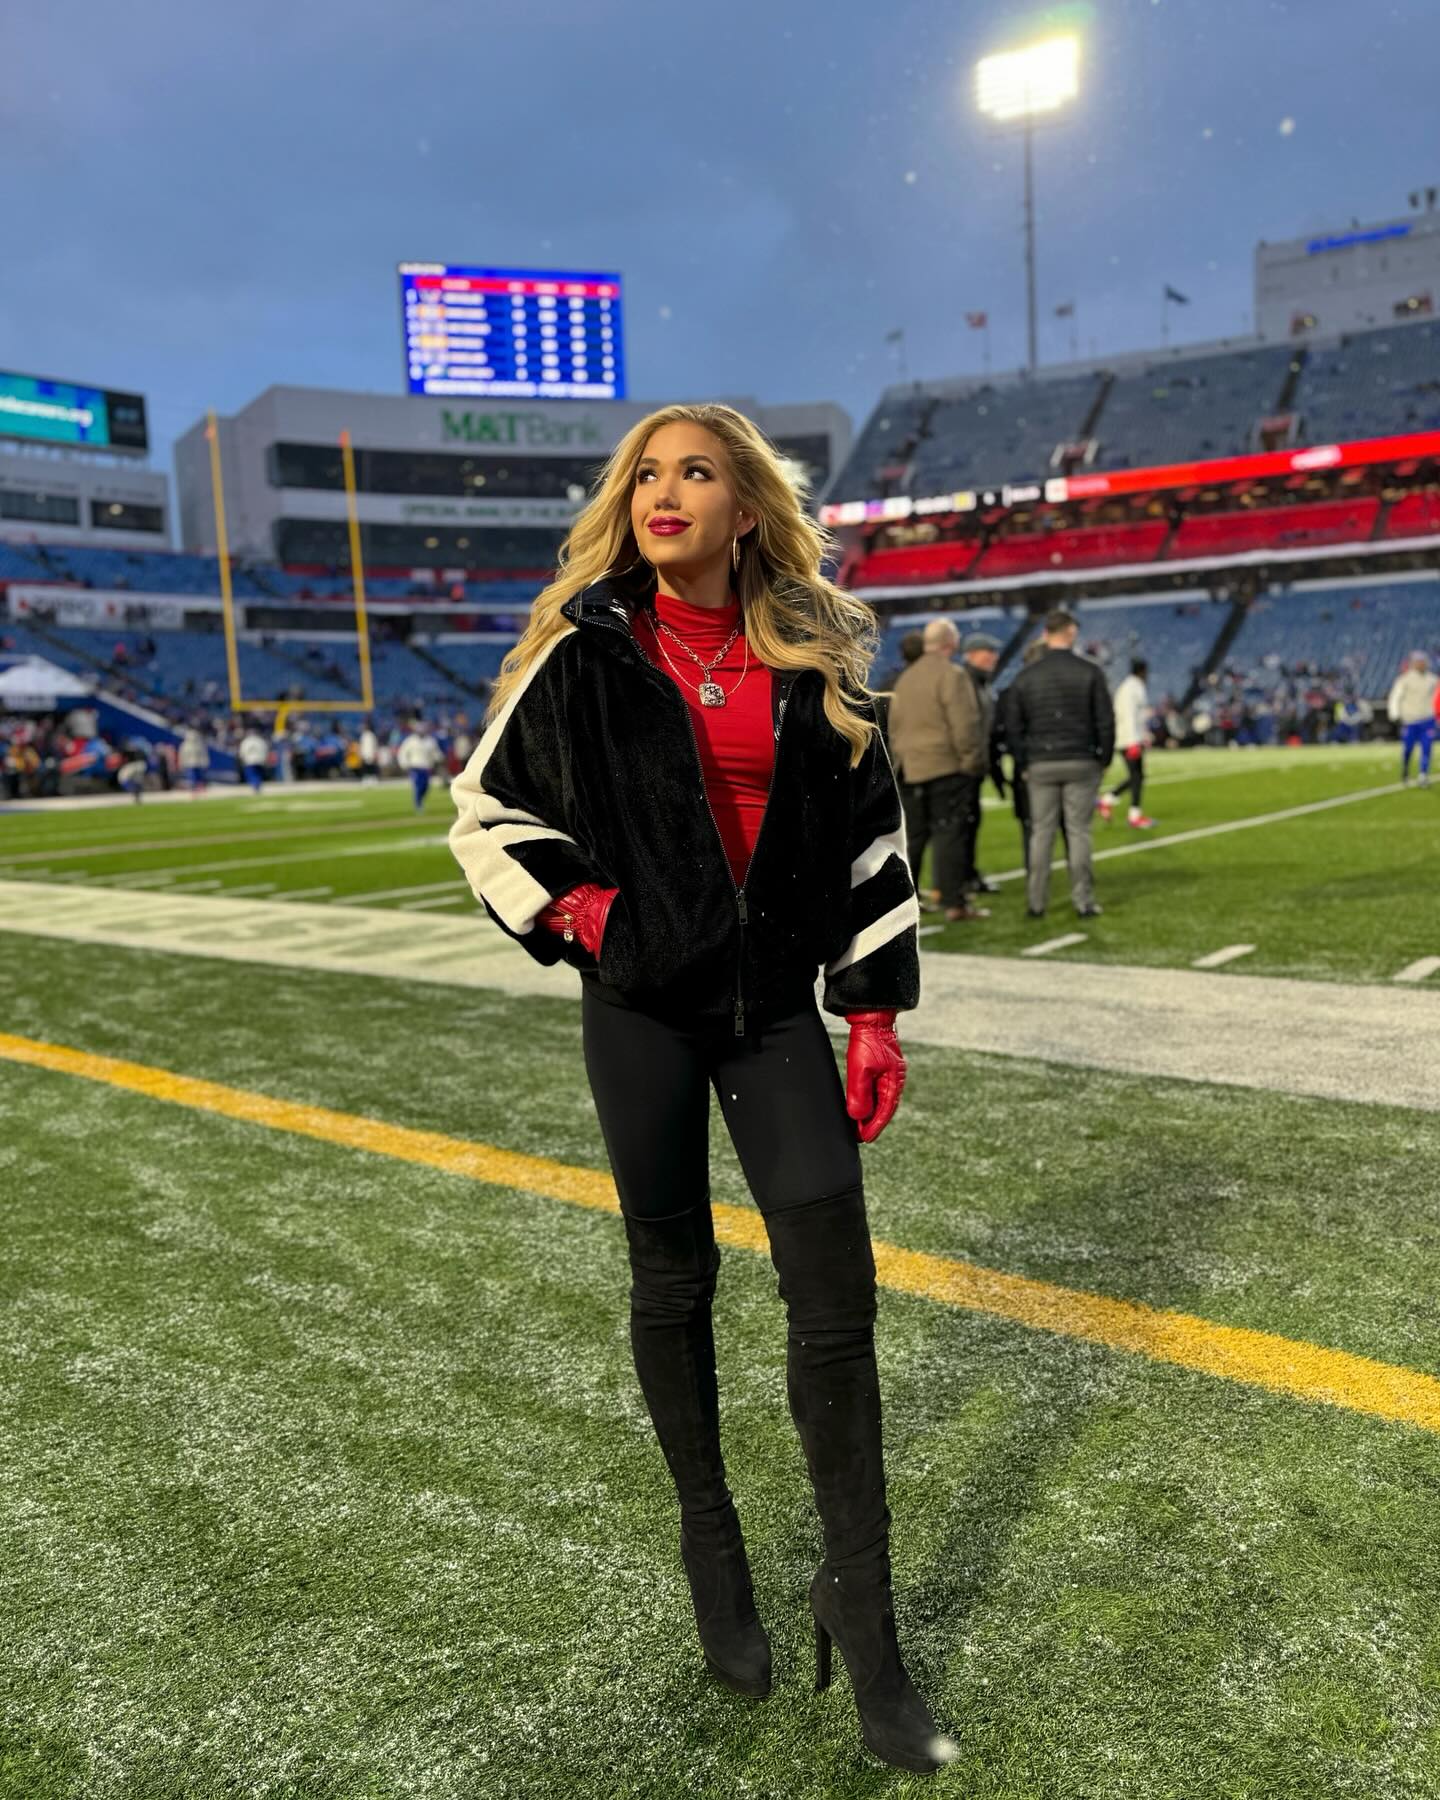 Brittany Mahomes and Gracie Hunt steal the show in daring outfits at Chiefs  Bills game as fans gasp 'you look fire!' | The US Sun